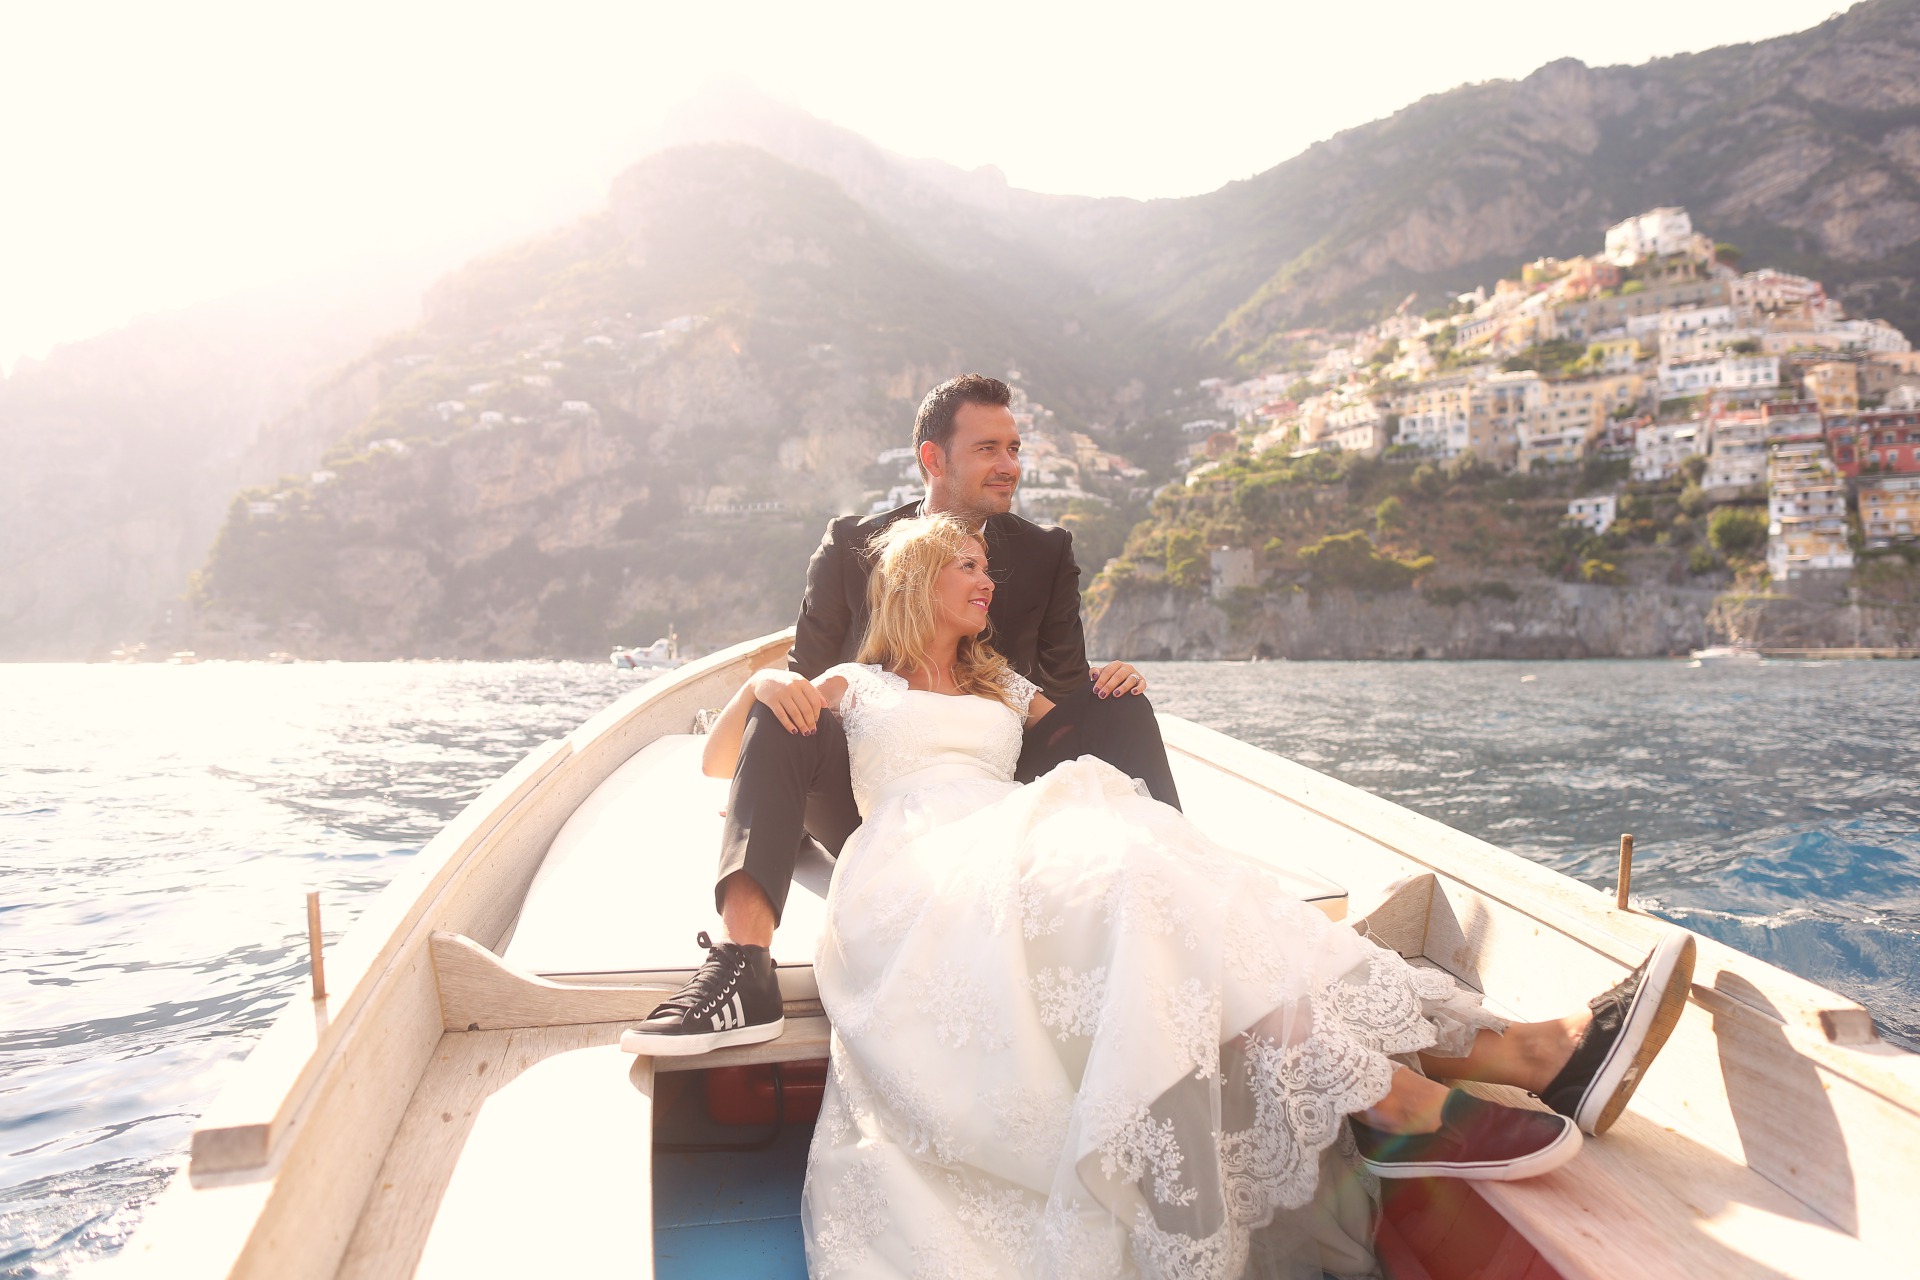 Gorgeous Bride And Groom lounge in boat off the coast of a dream destination